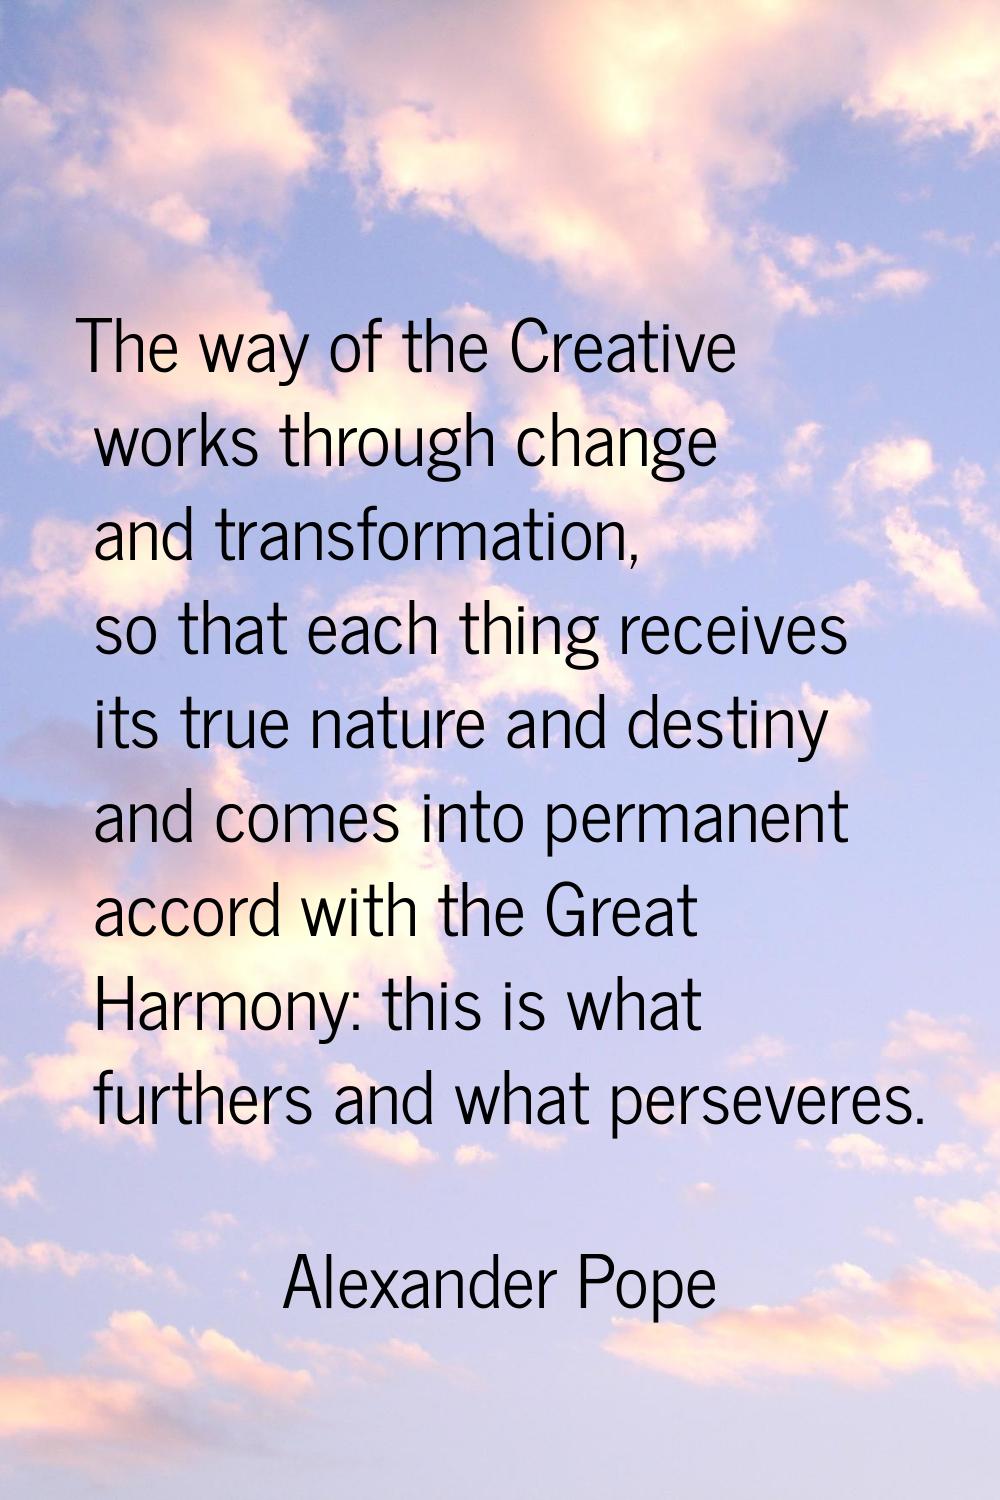 The way of the Creative works through change and transformation, so that each thing receives its tr